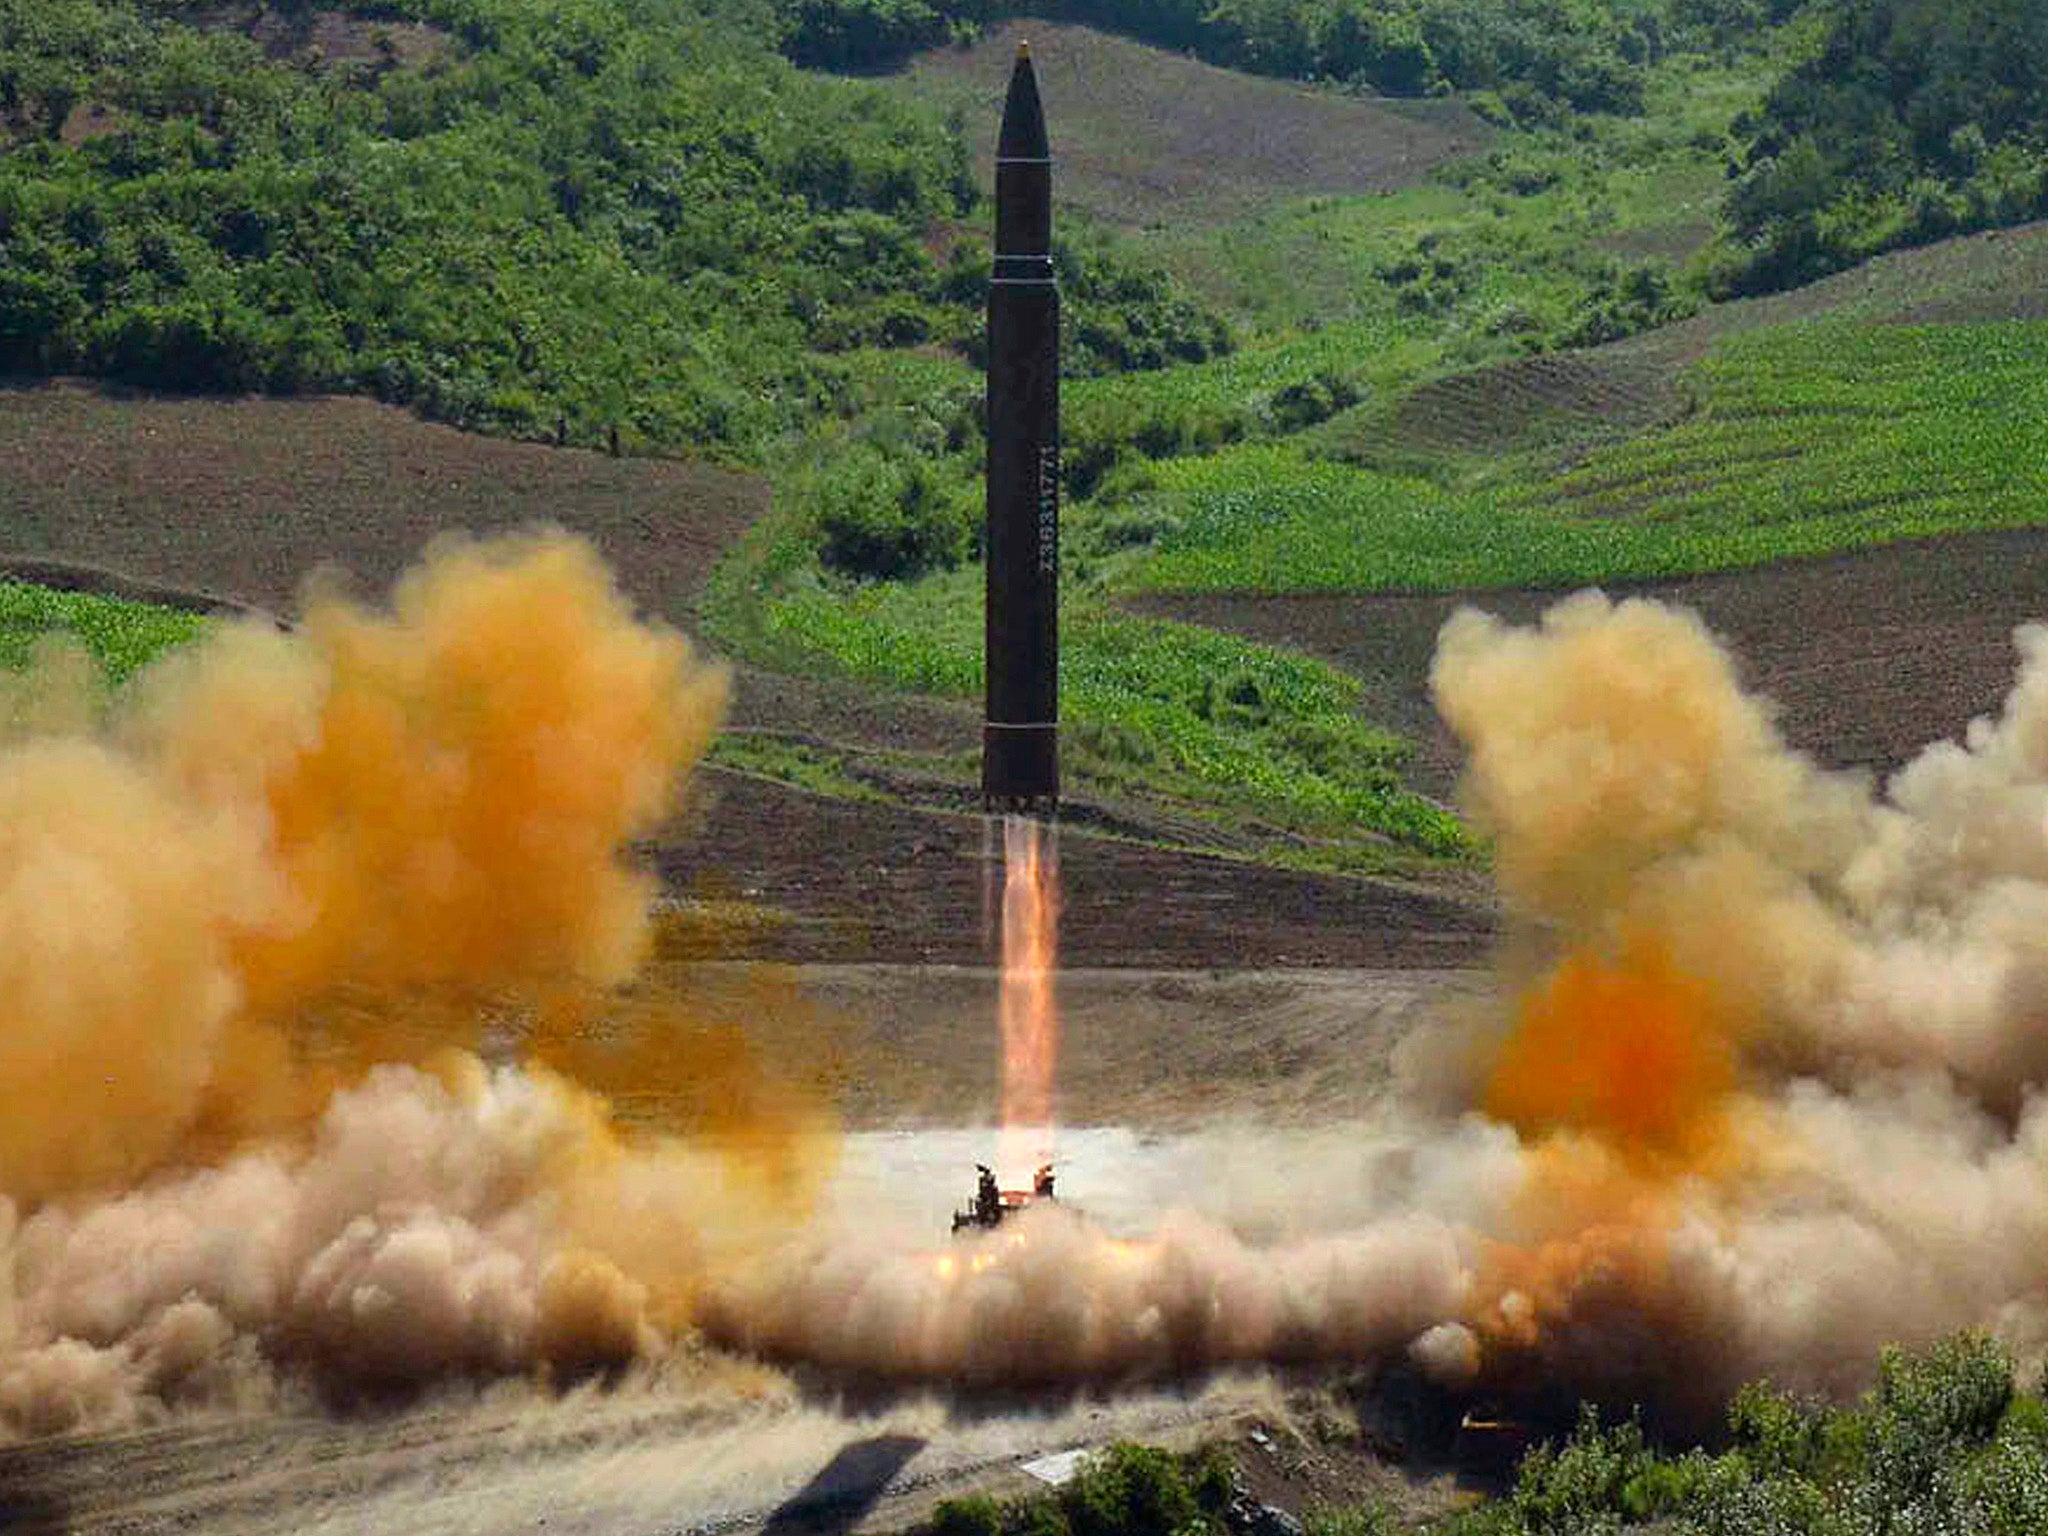 North Korea has carried out a number of missile tests in recent months